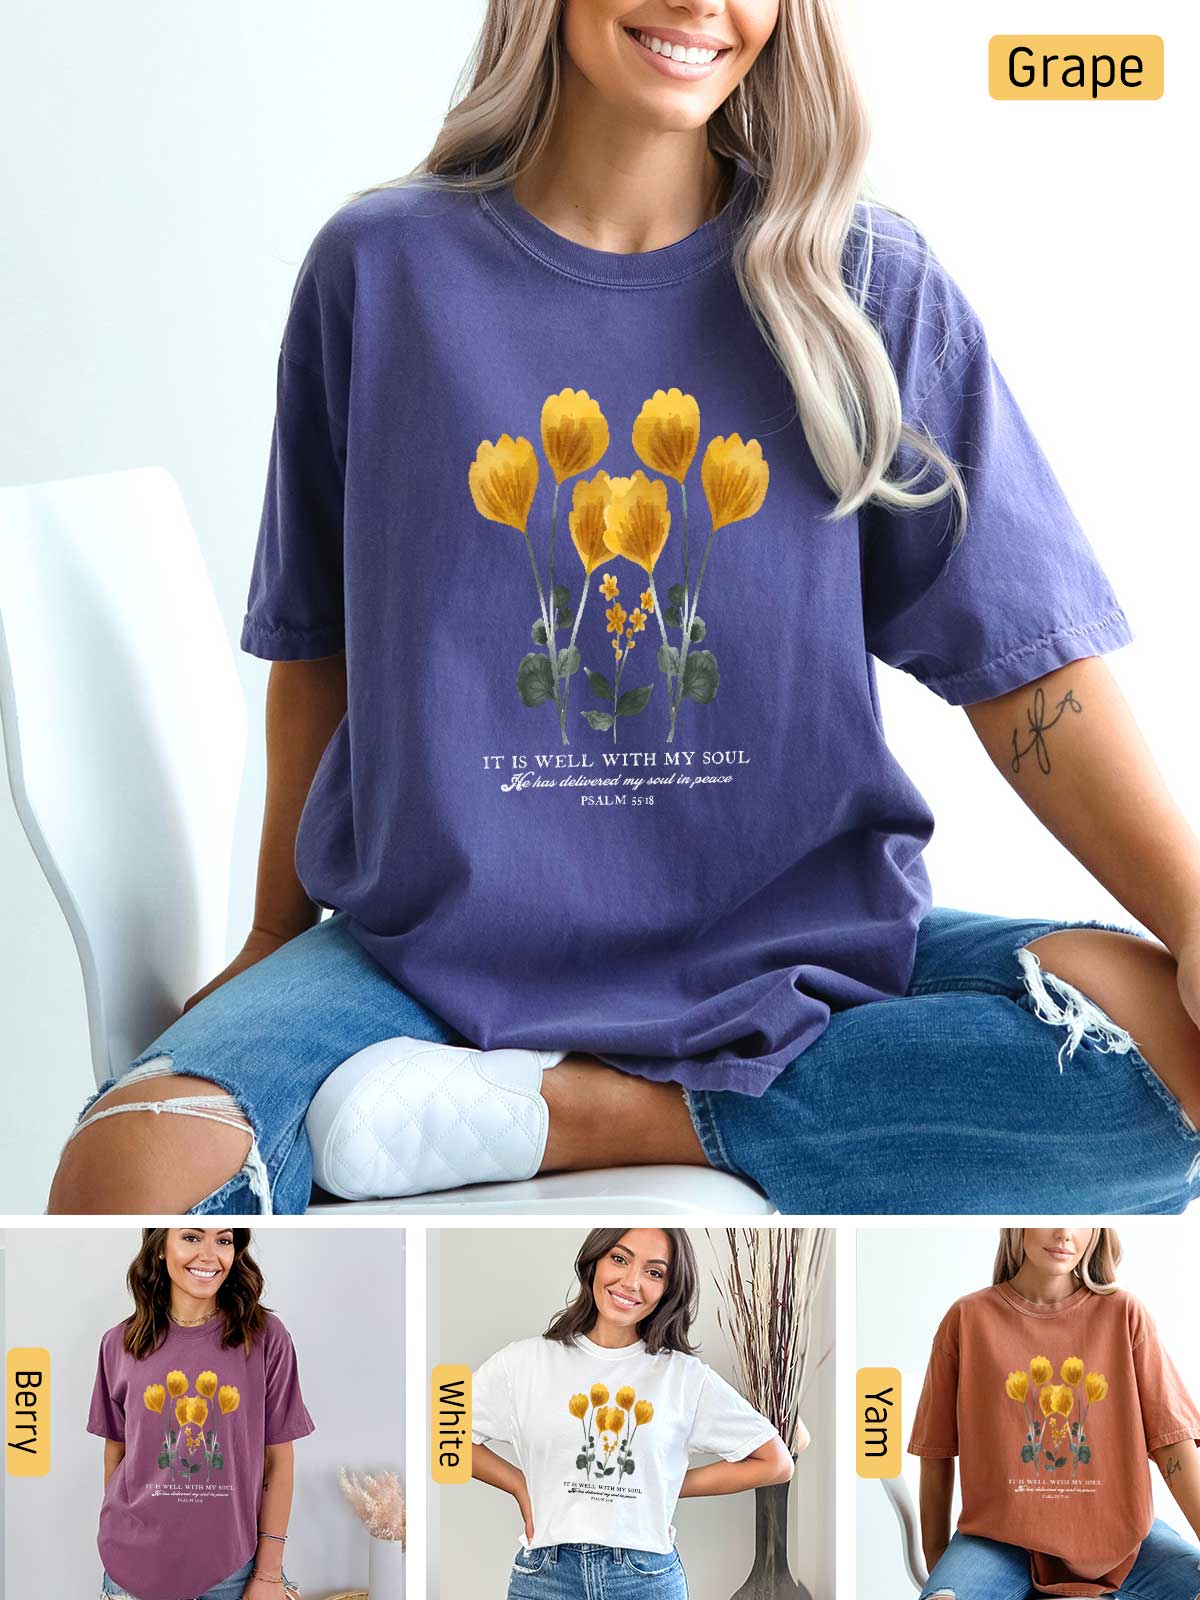 a woman wearing a purple shirt with yellow flowers on it